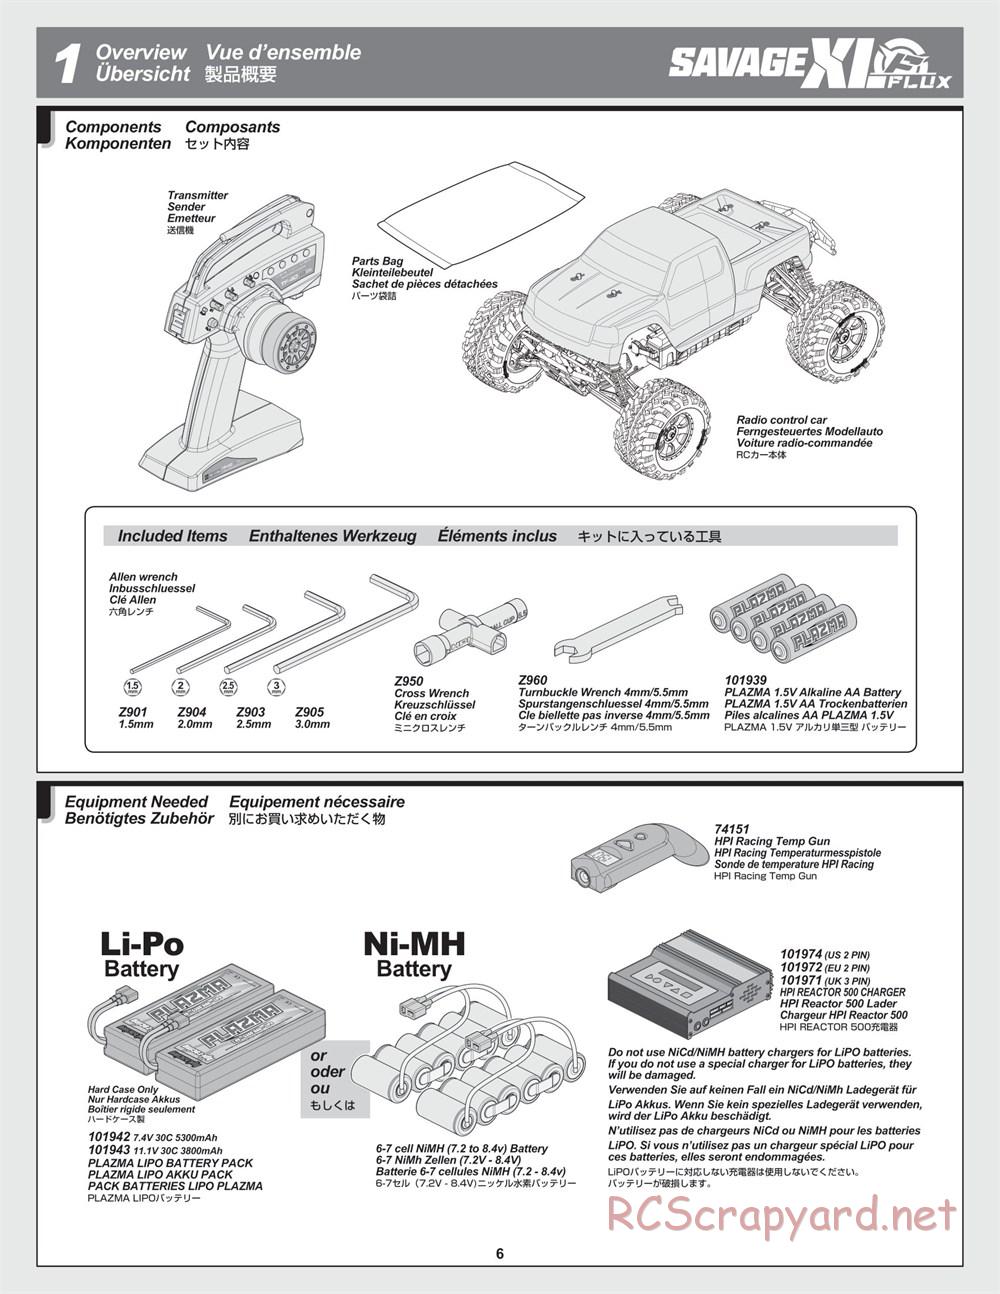 HPI - Savage XL Flux - Manual - Page 6